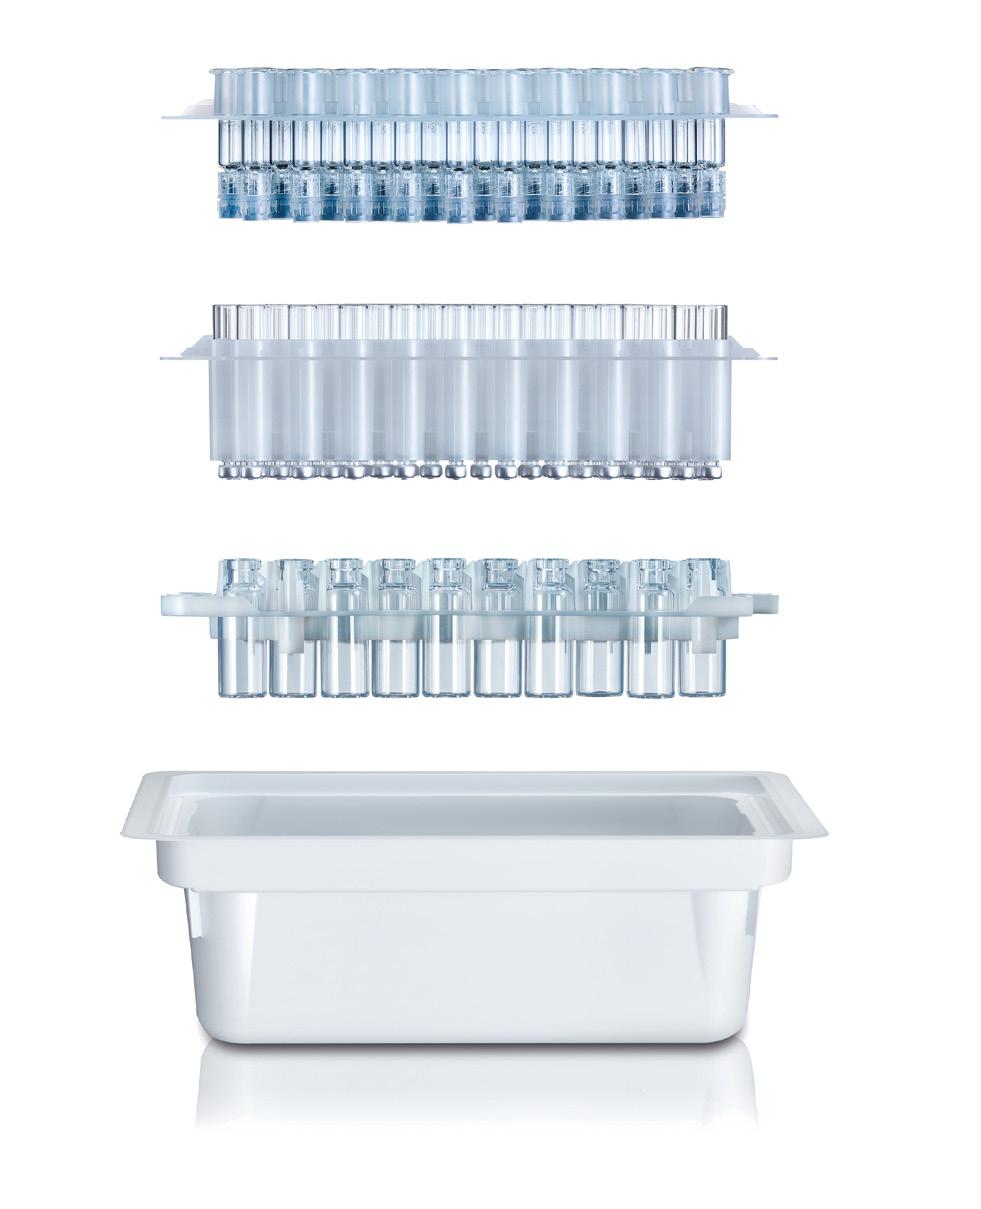 making their processes leaner. RTU has set the standard for syringes and is now offered by a number of vendors, including Schott.